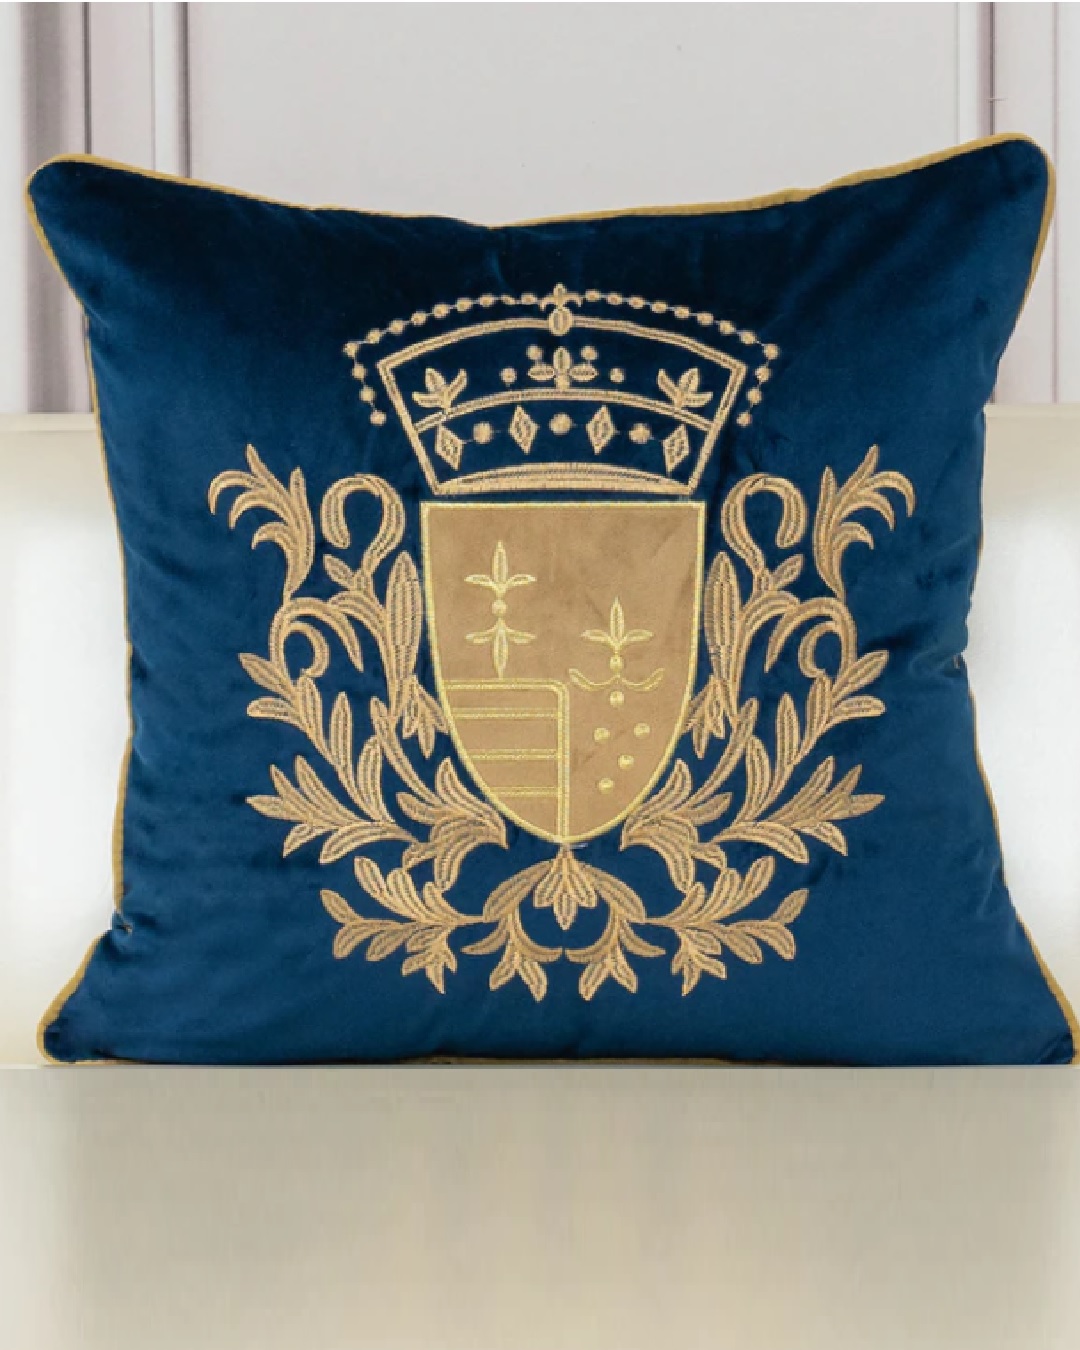 Blue and gold embroidered cushion